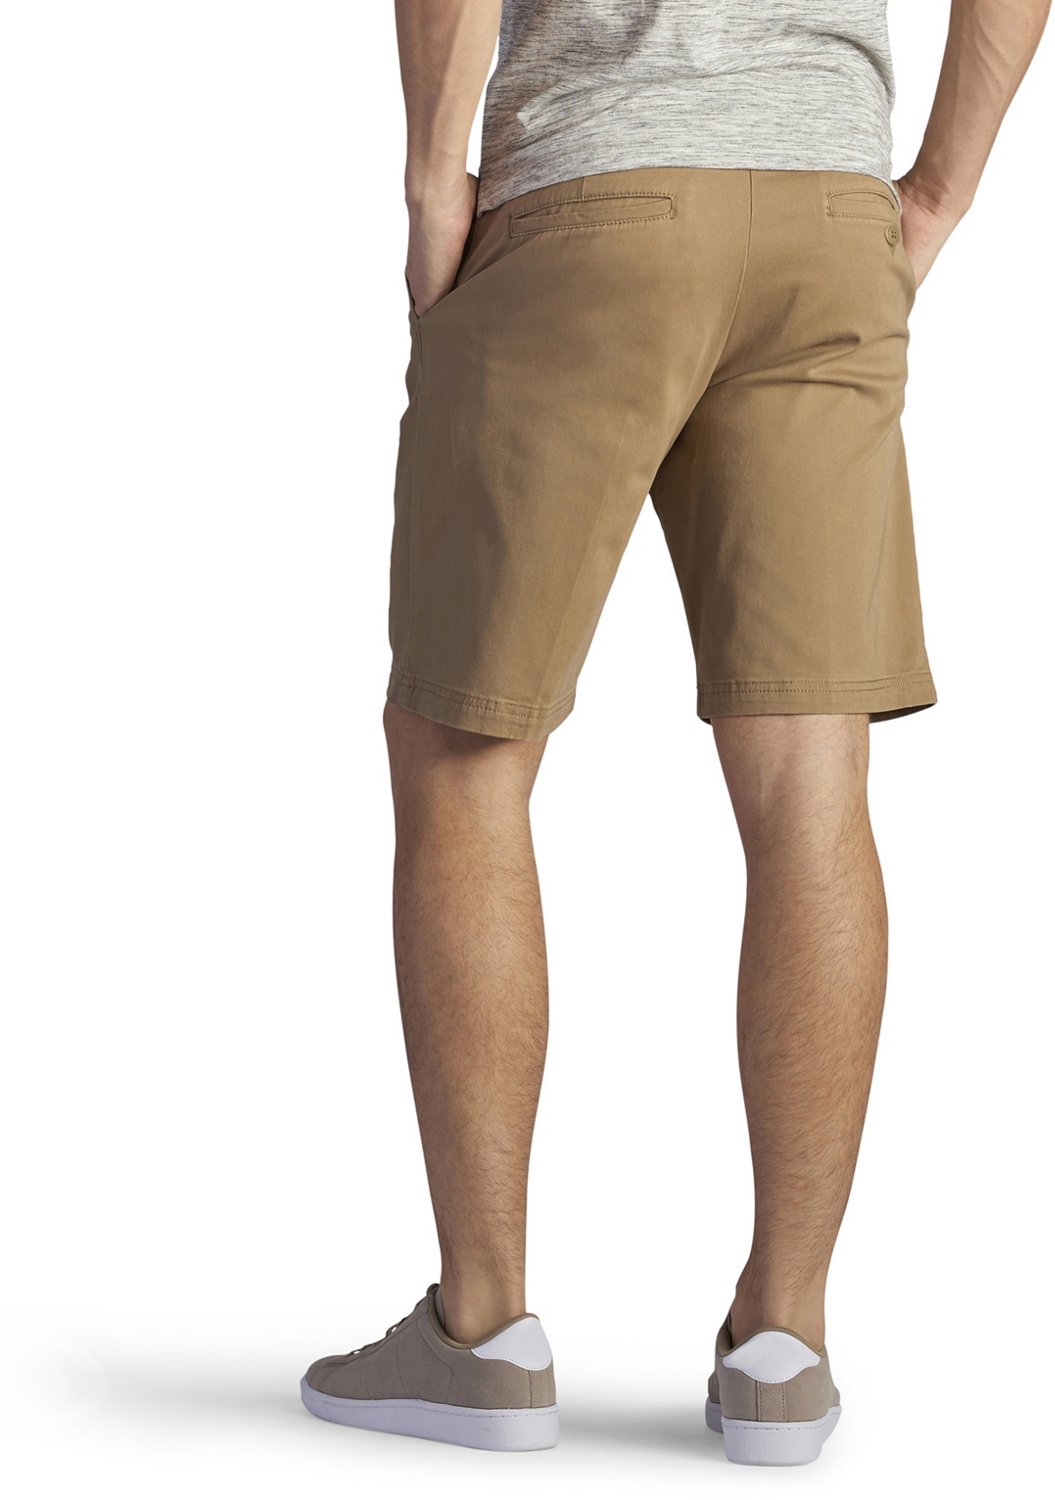 Lee Men's Extreme Comfort Short | Free Shipping at Academy